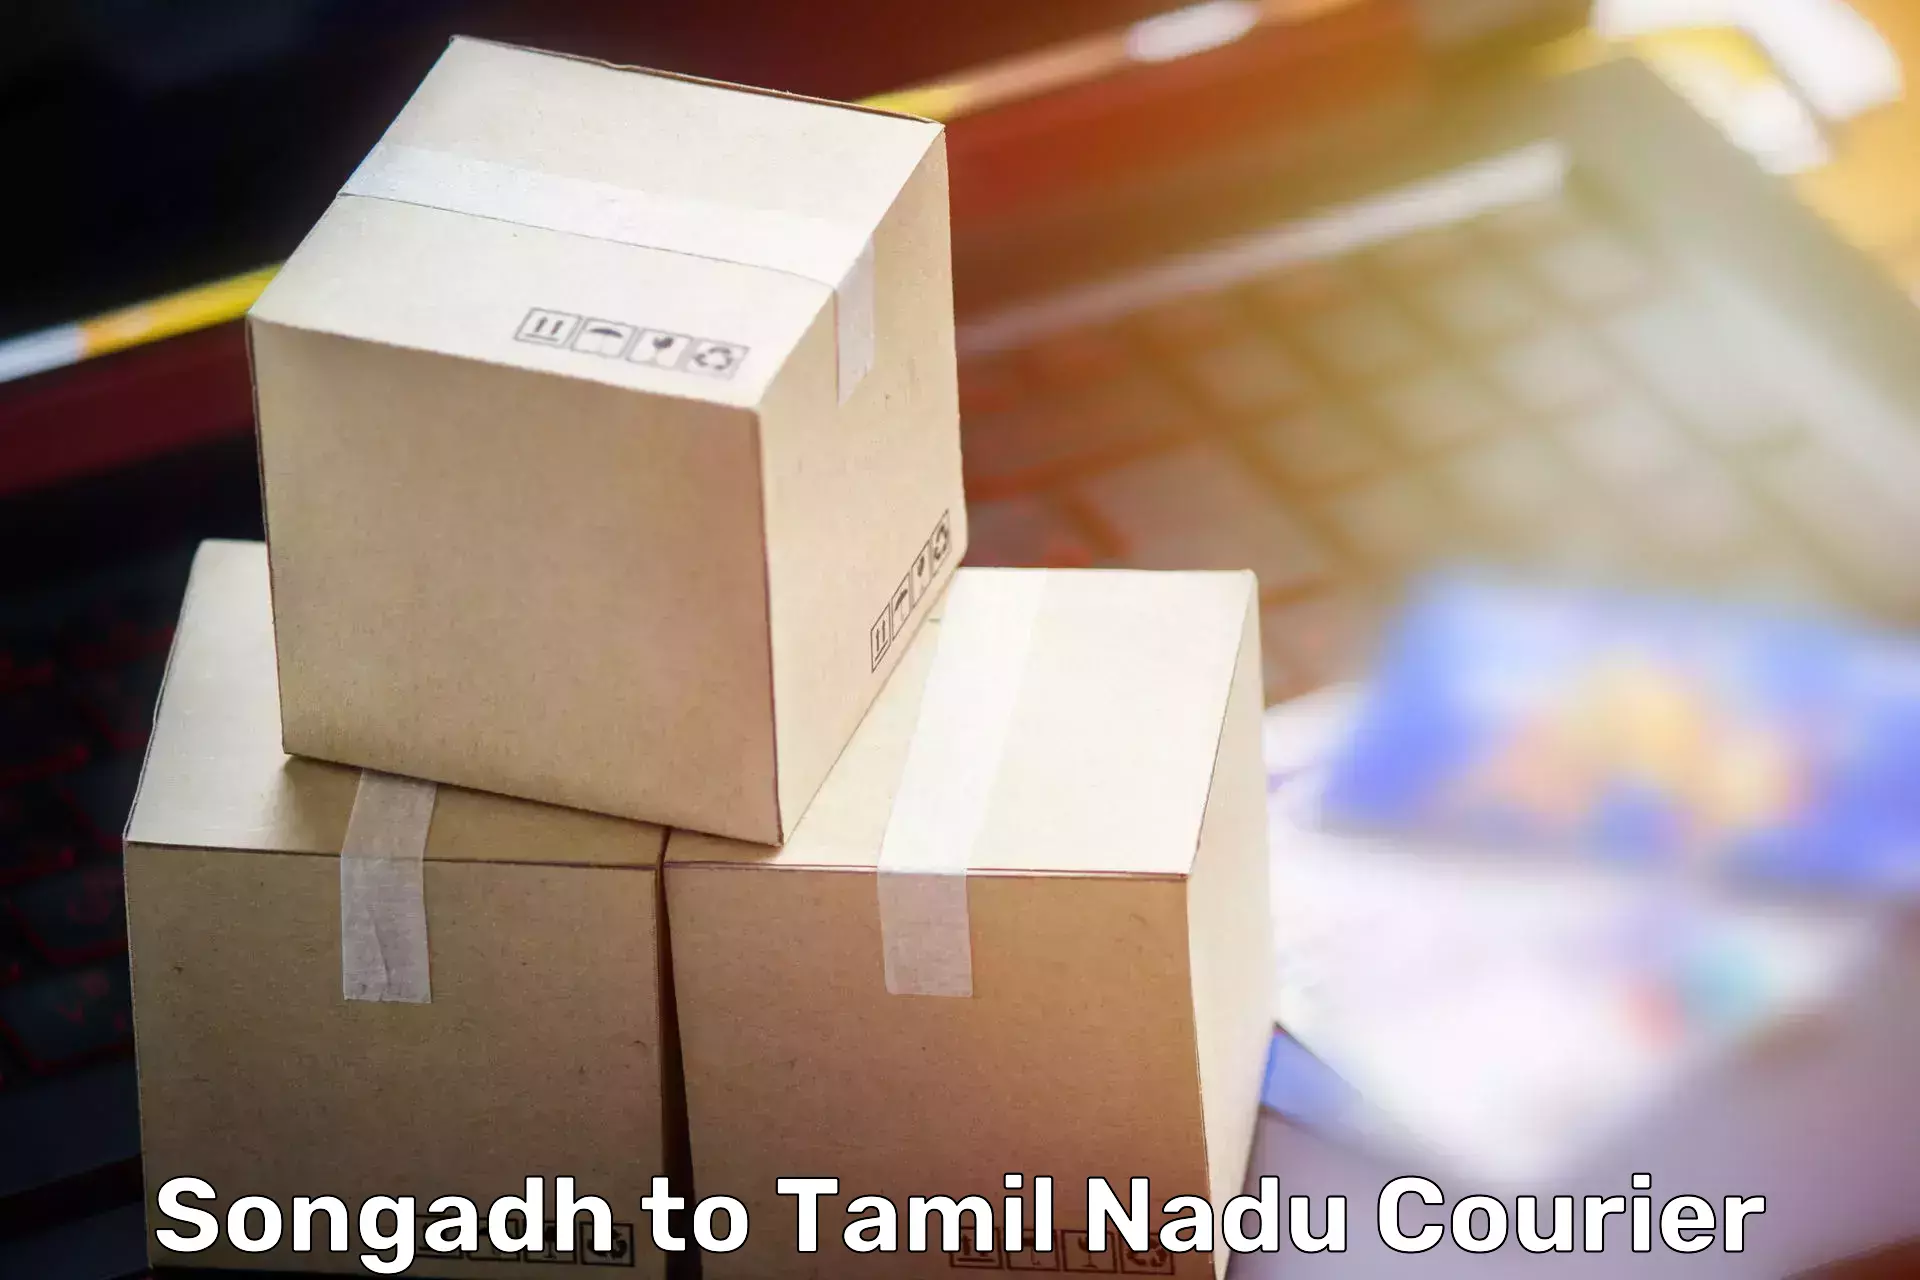 Furniture transport professionals Songadh to Anthiyur